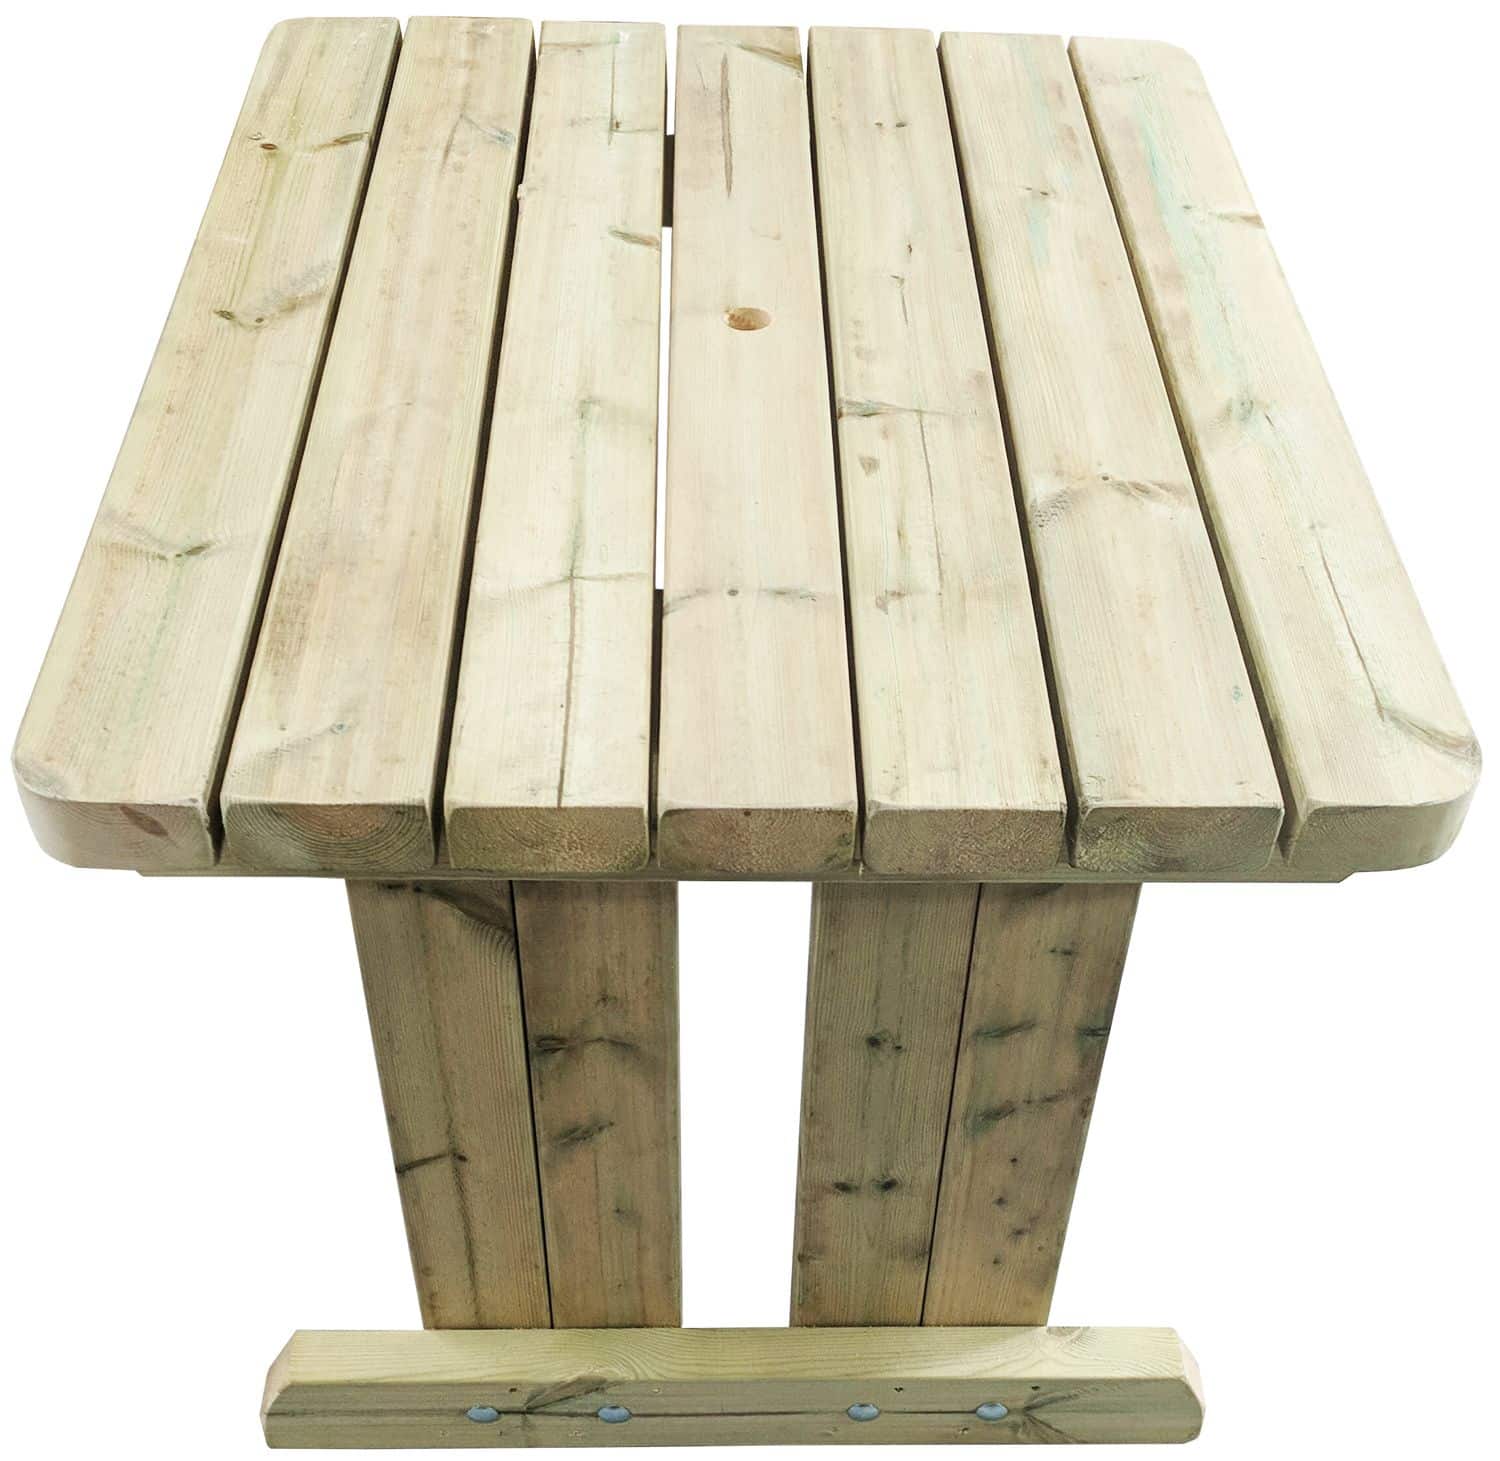 stand alone product image of a wooden garden dining table